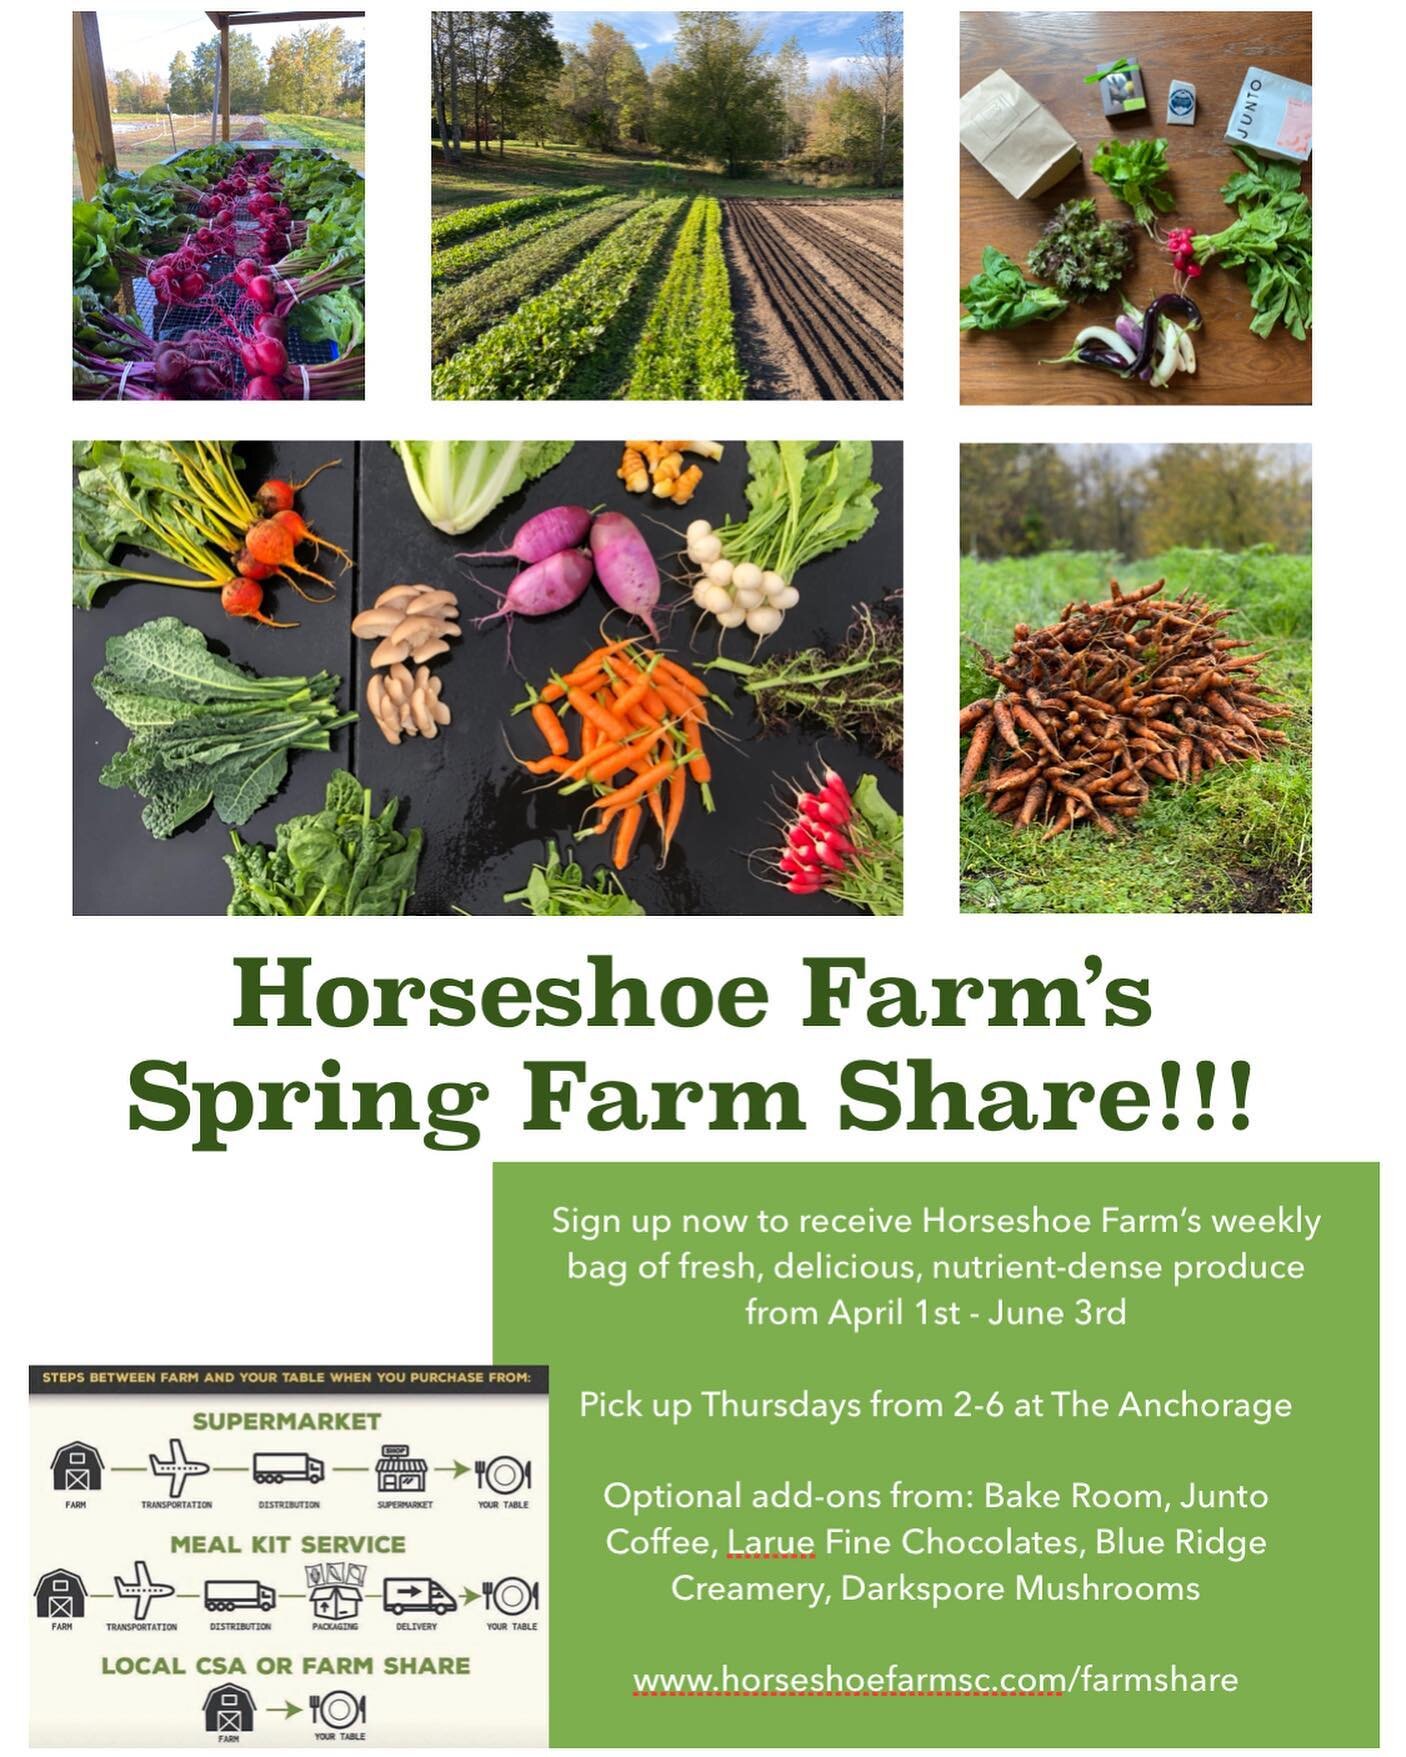 We are happy to announce our 10 week Spring Farm Share! 
&bull;
Get a weekly bag of fresh, nutrient dense, beyond-organic produce grown without the use of any synthetic fertilizers or pesticides/herbicides of any kind. With optional add-ons from @sc_